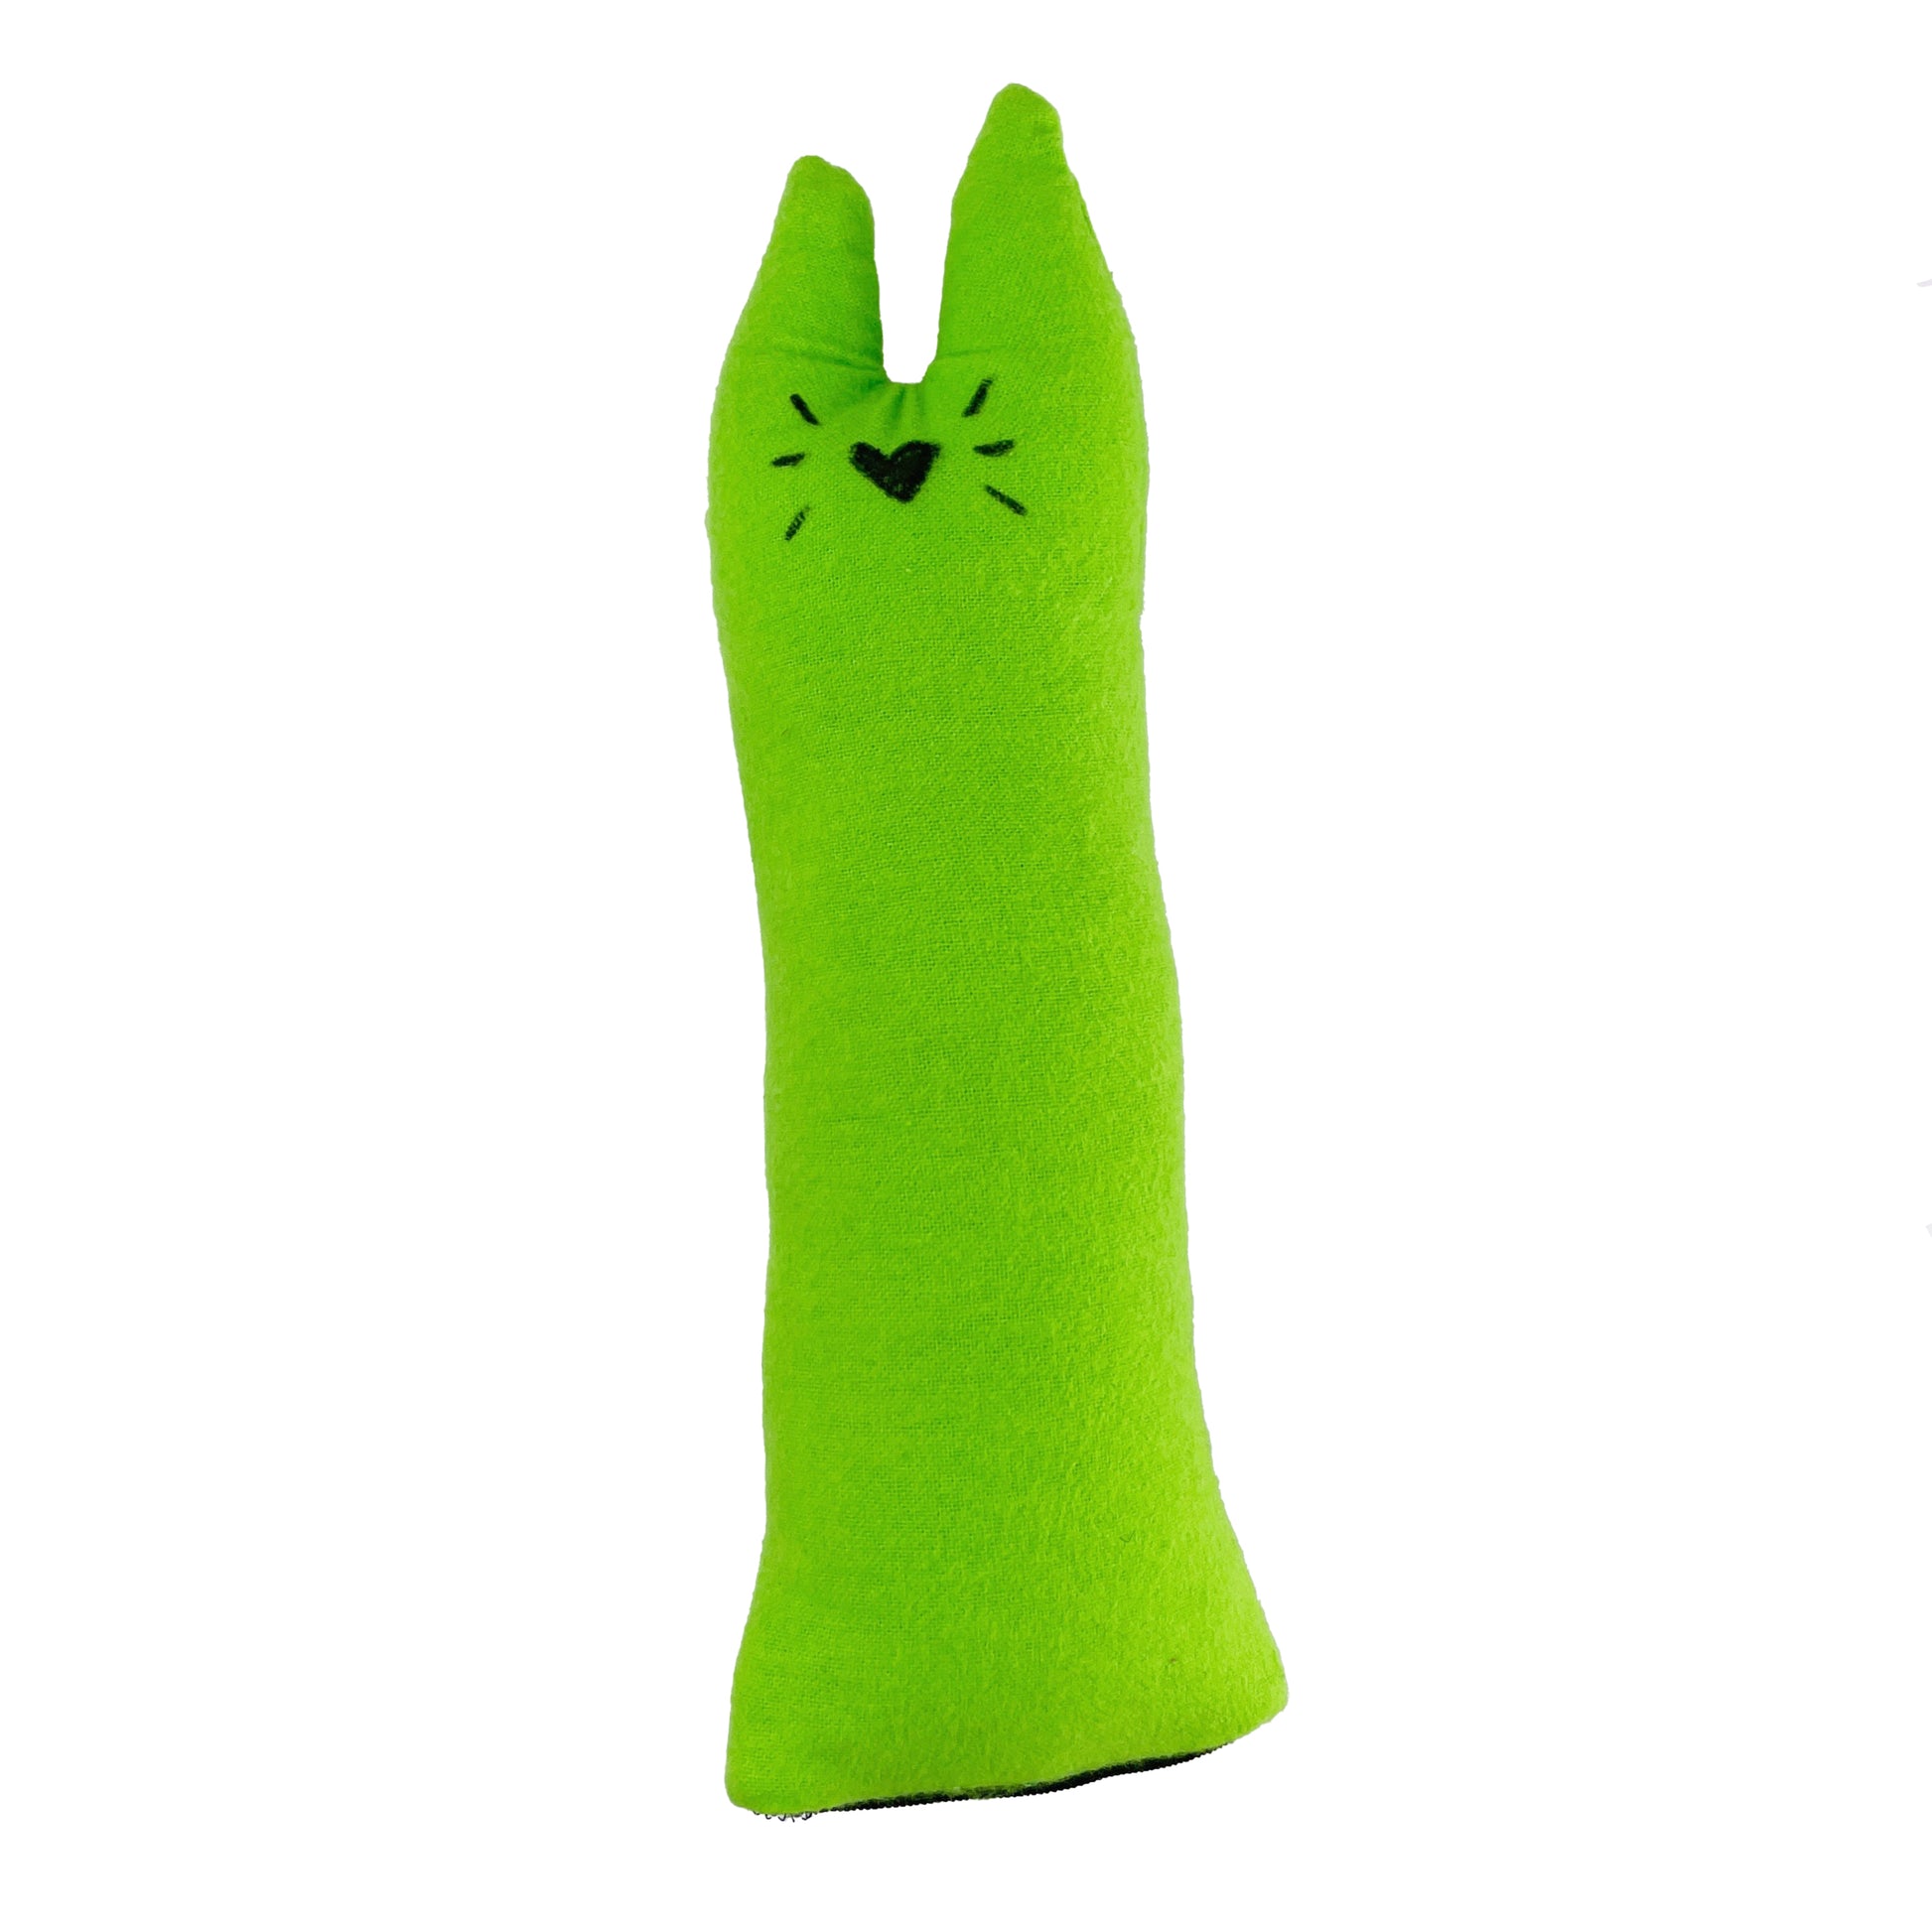 Green Fizzle Sticks cat toy that can be filled with catnip